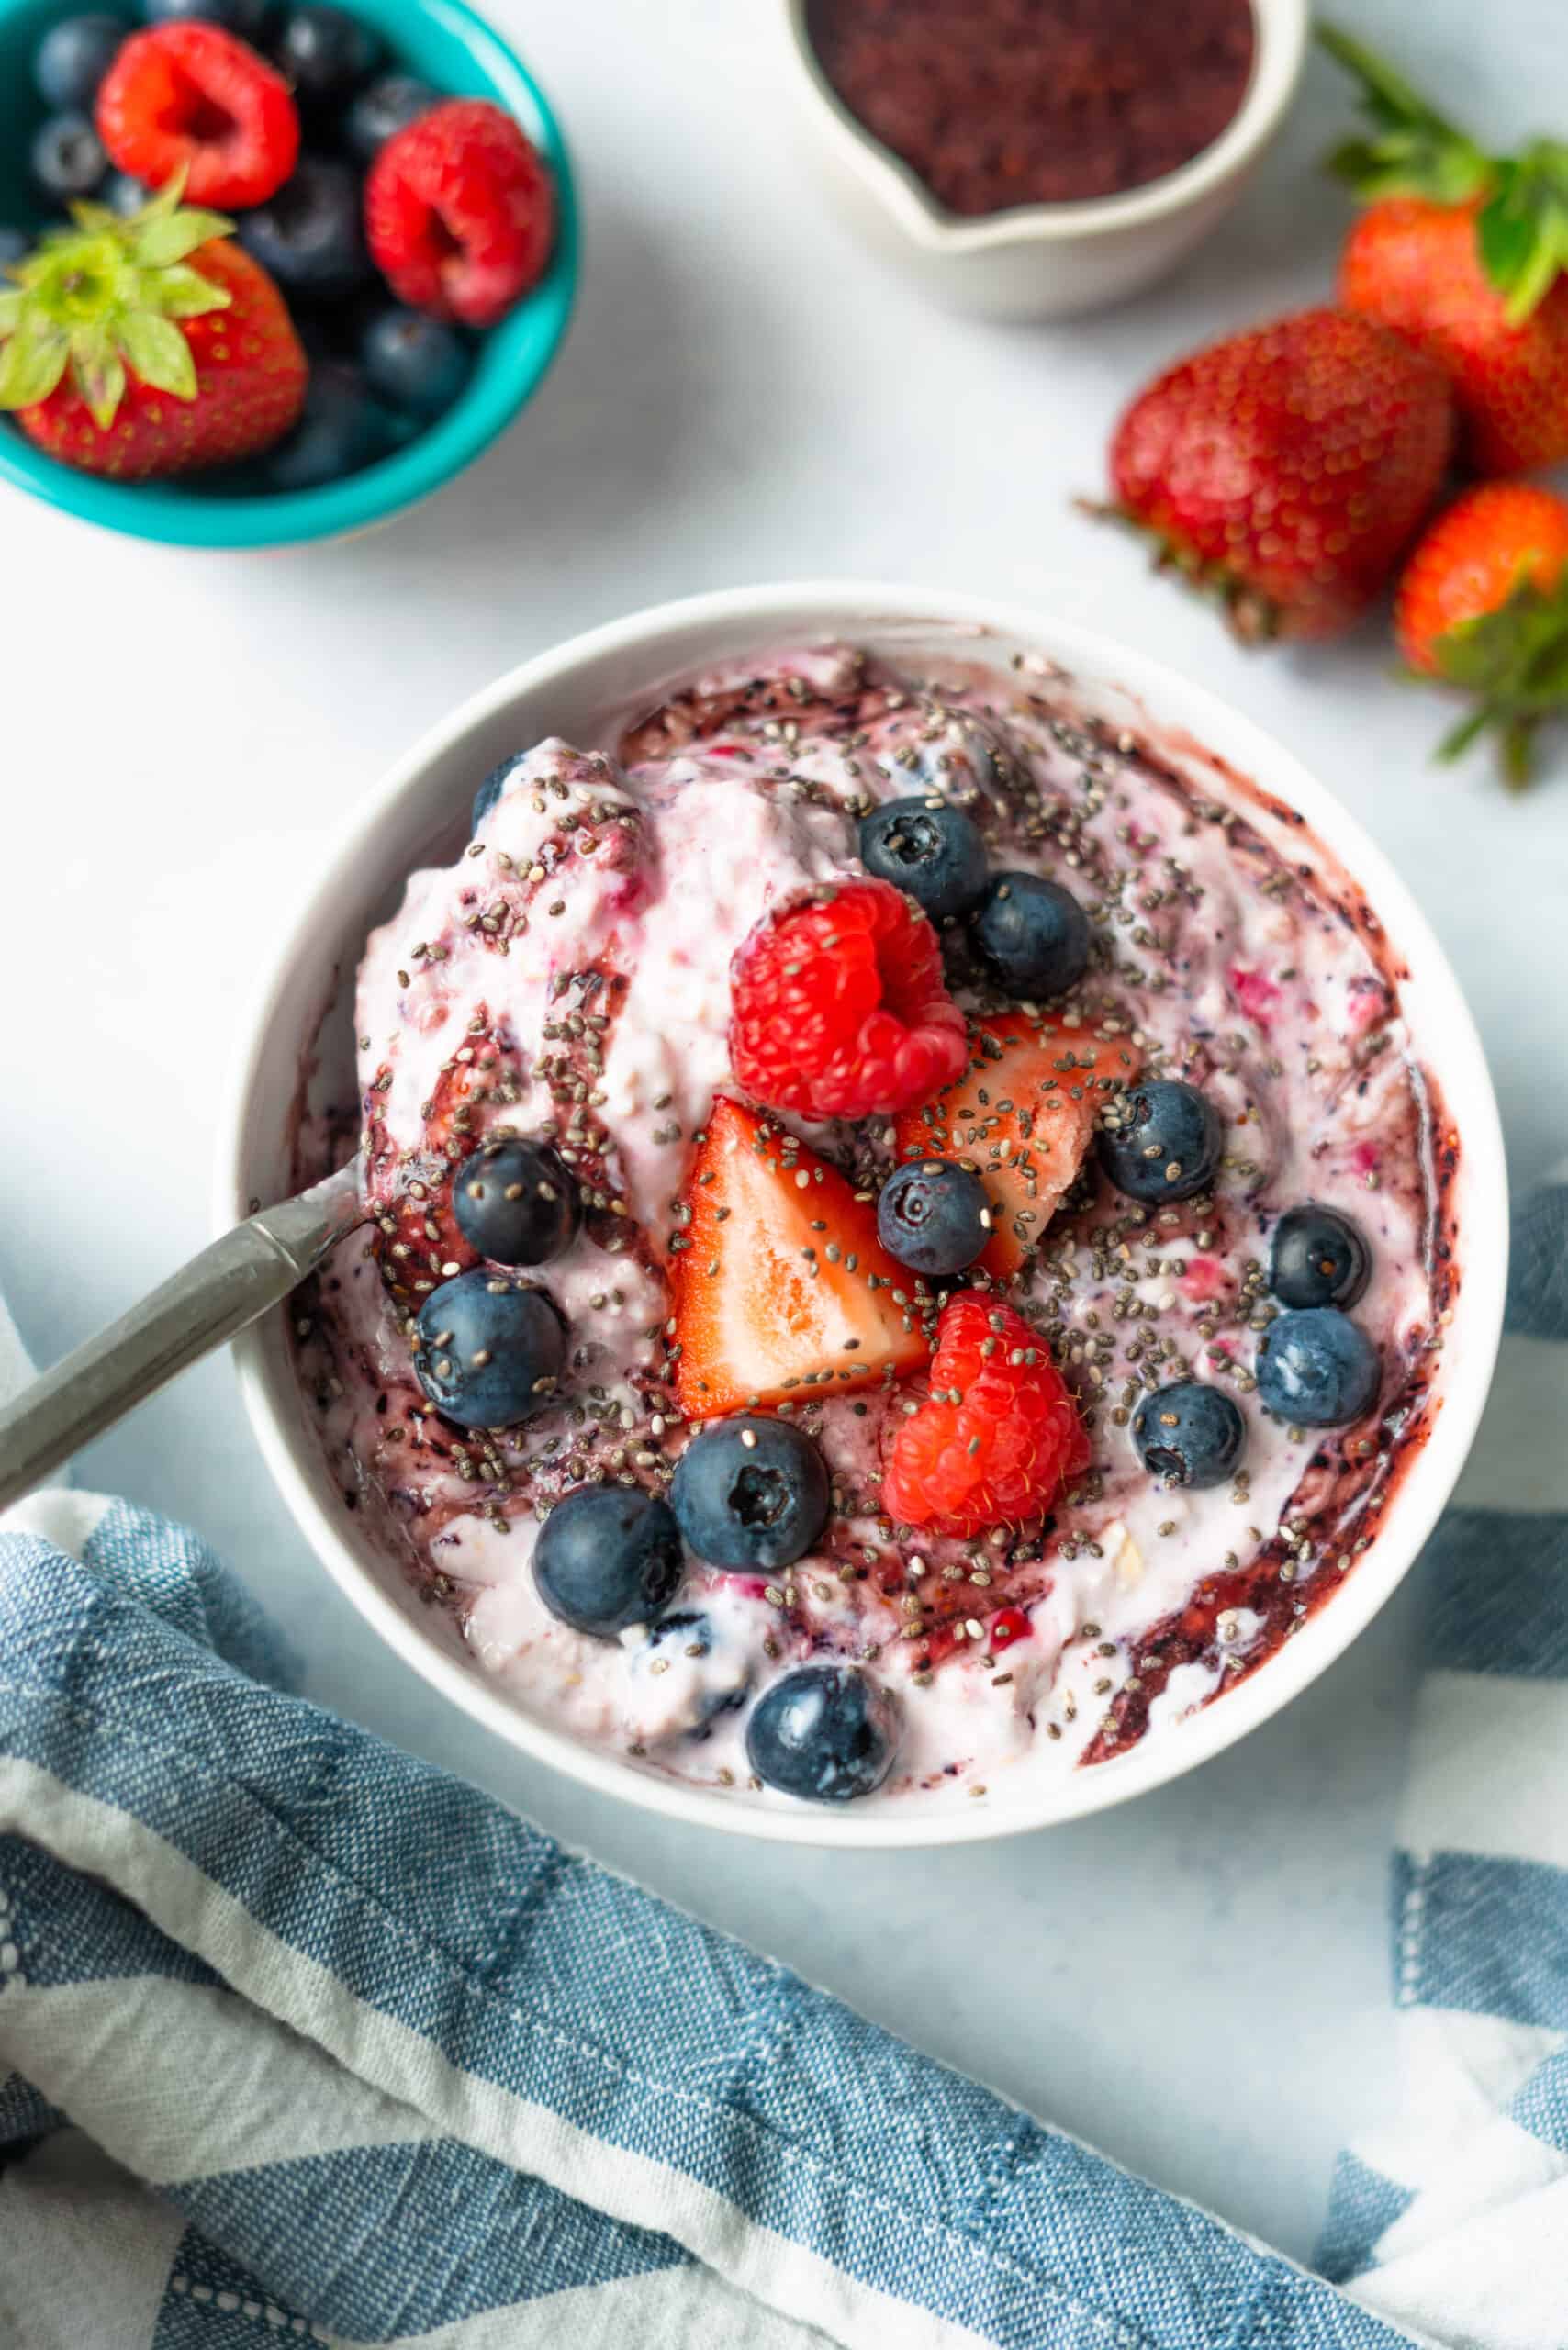 https://laurenfitfoodie.com/wp-content/uploads/2023/06/mixed-berry-overnight-oats-07-scaled.jpg